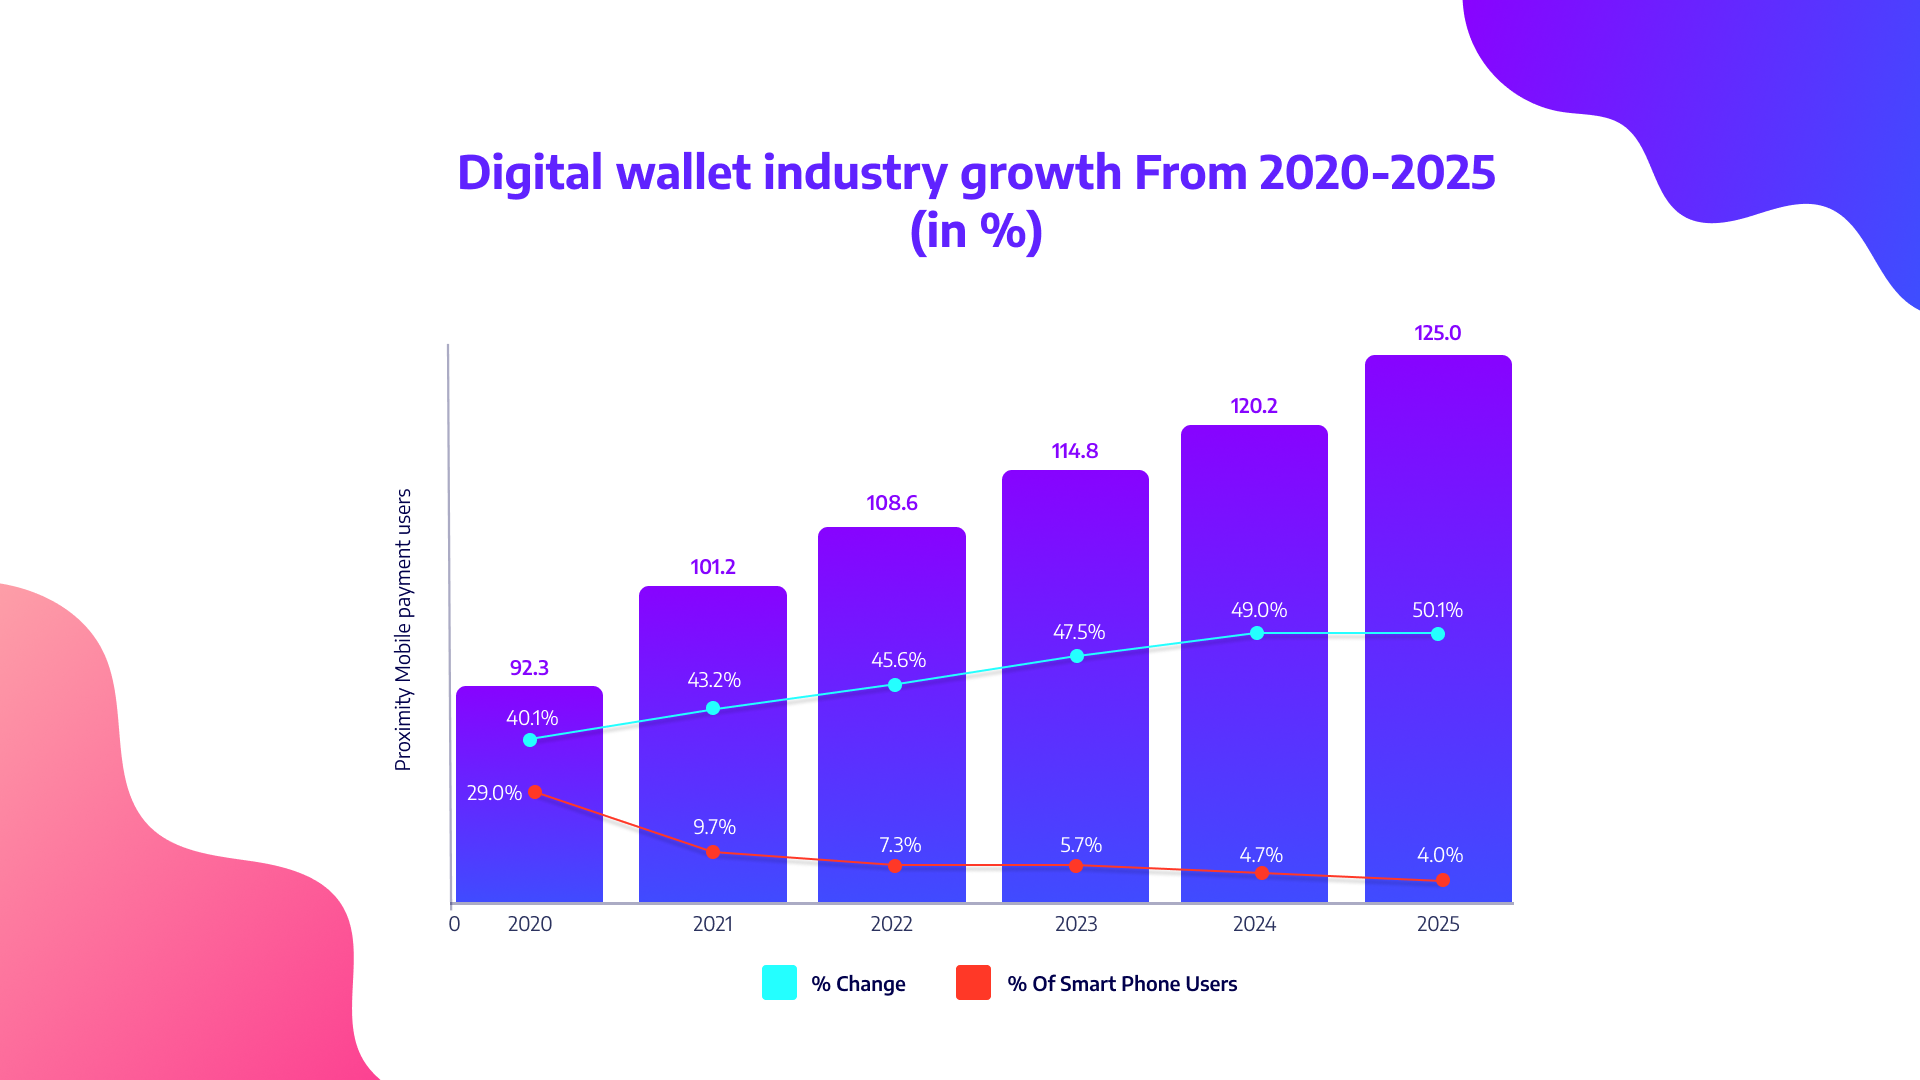 Digital wallet industry growth from 2020-2025